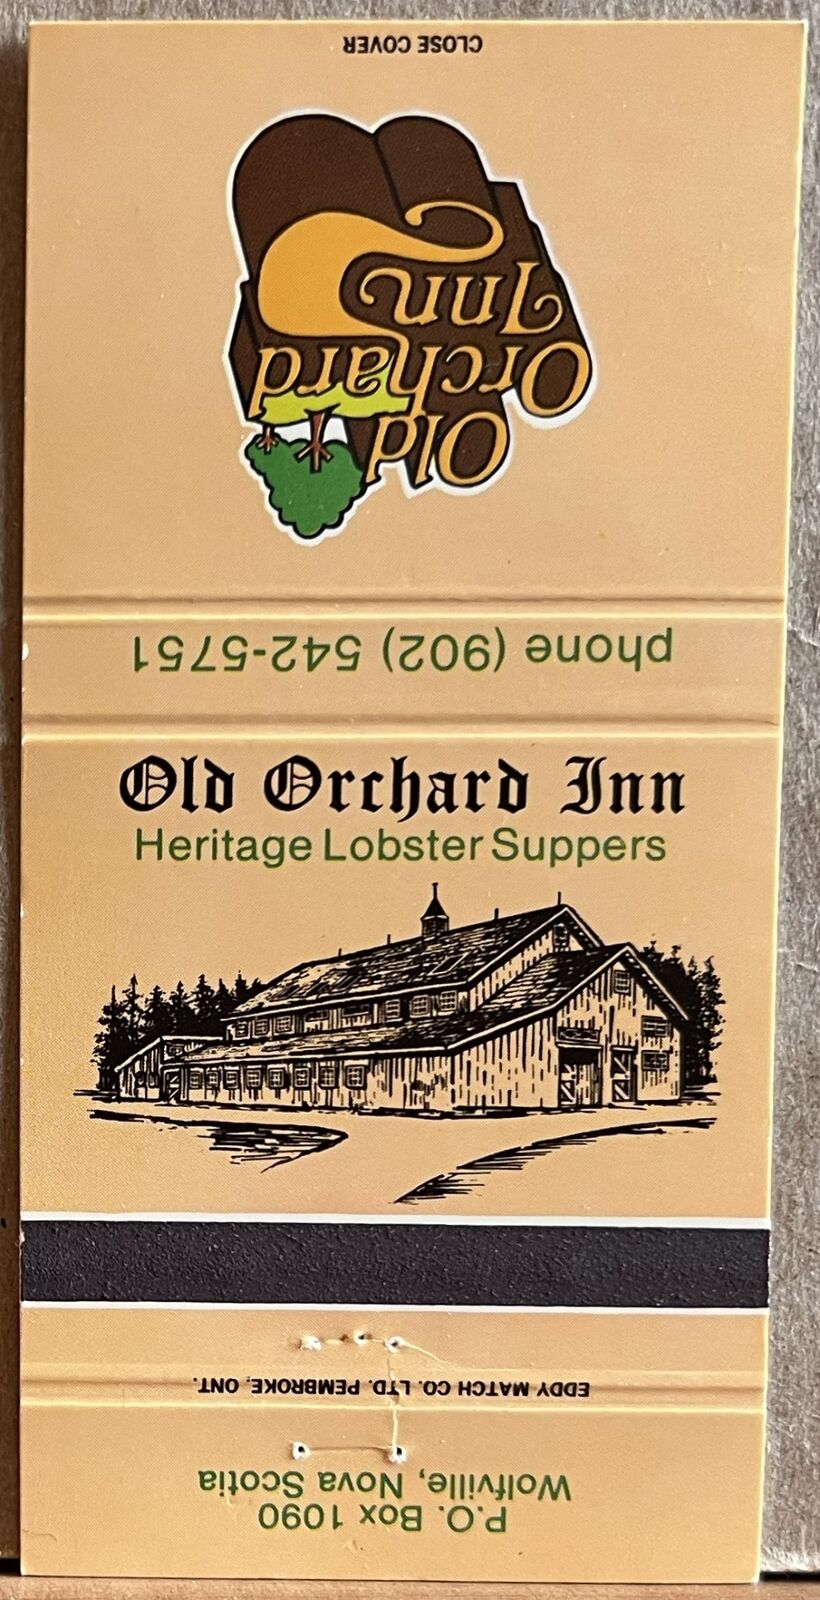 Old Orchard Inn Wolfville NS Nova Scotia Canada Vintage Matchbook Cover